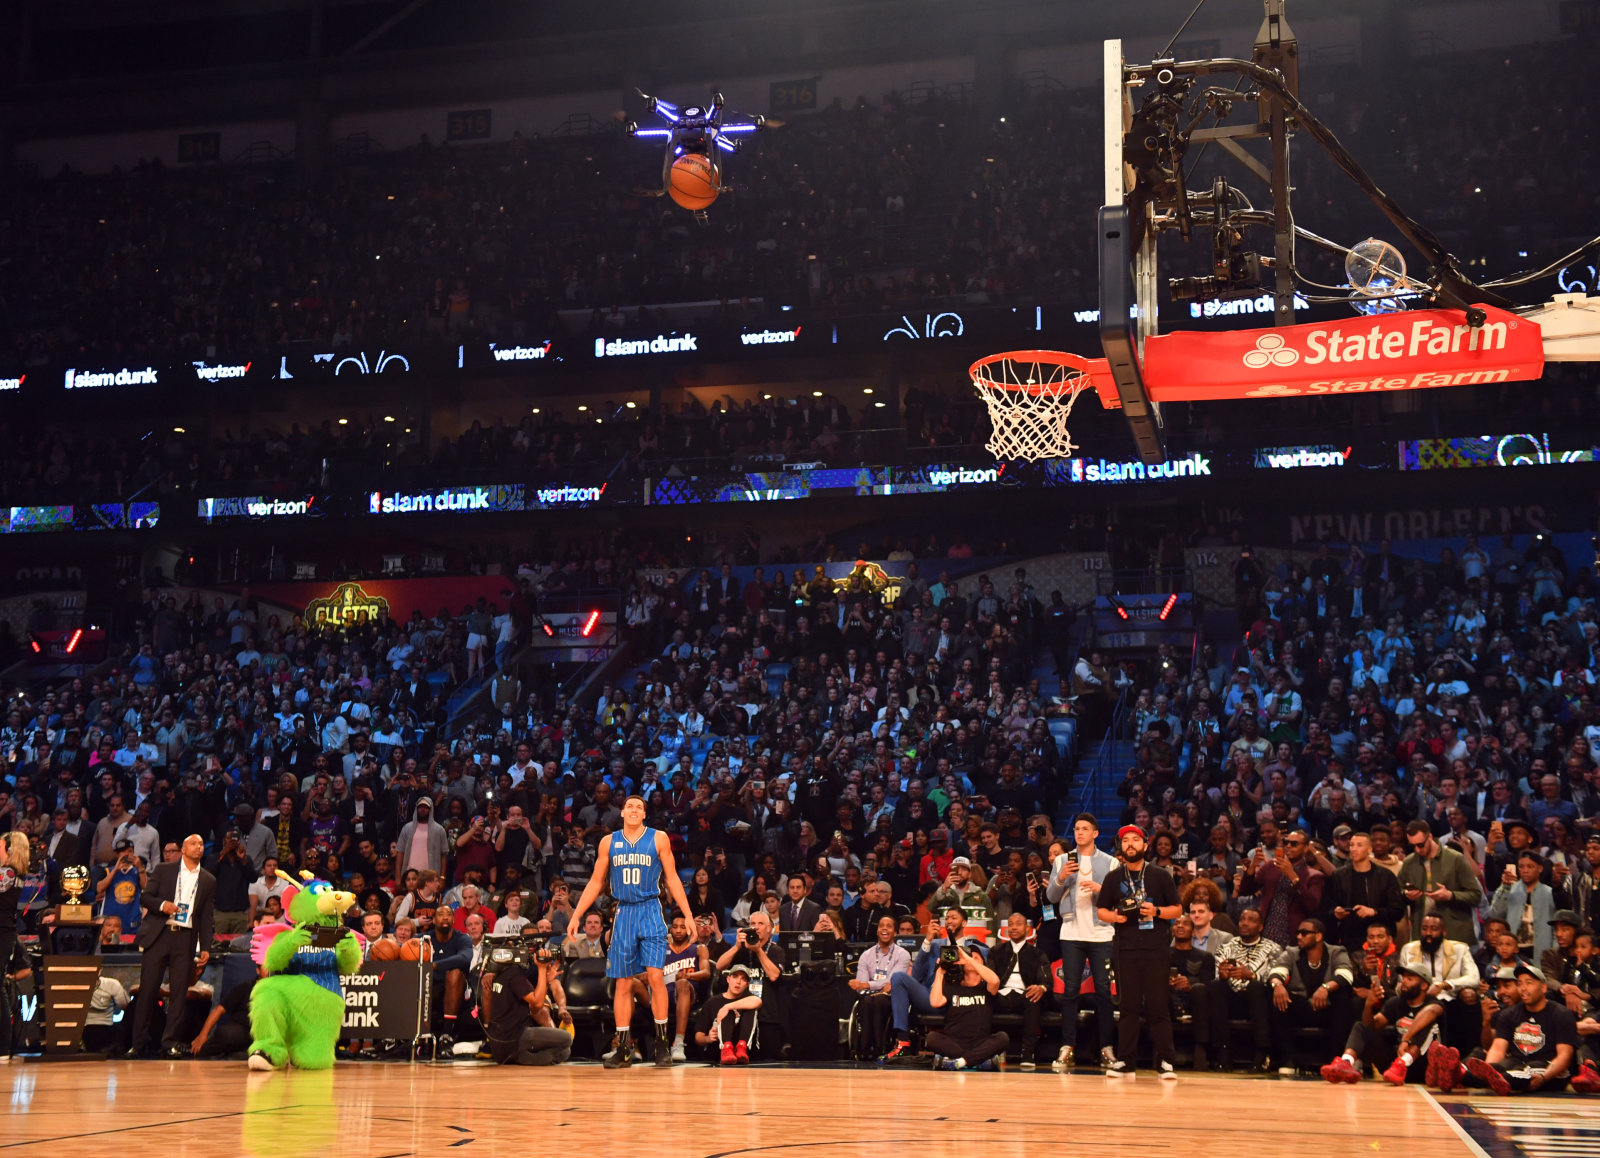 Intel joins in on NBA All Star Weekend